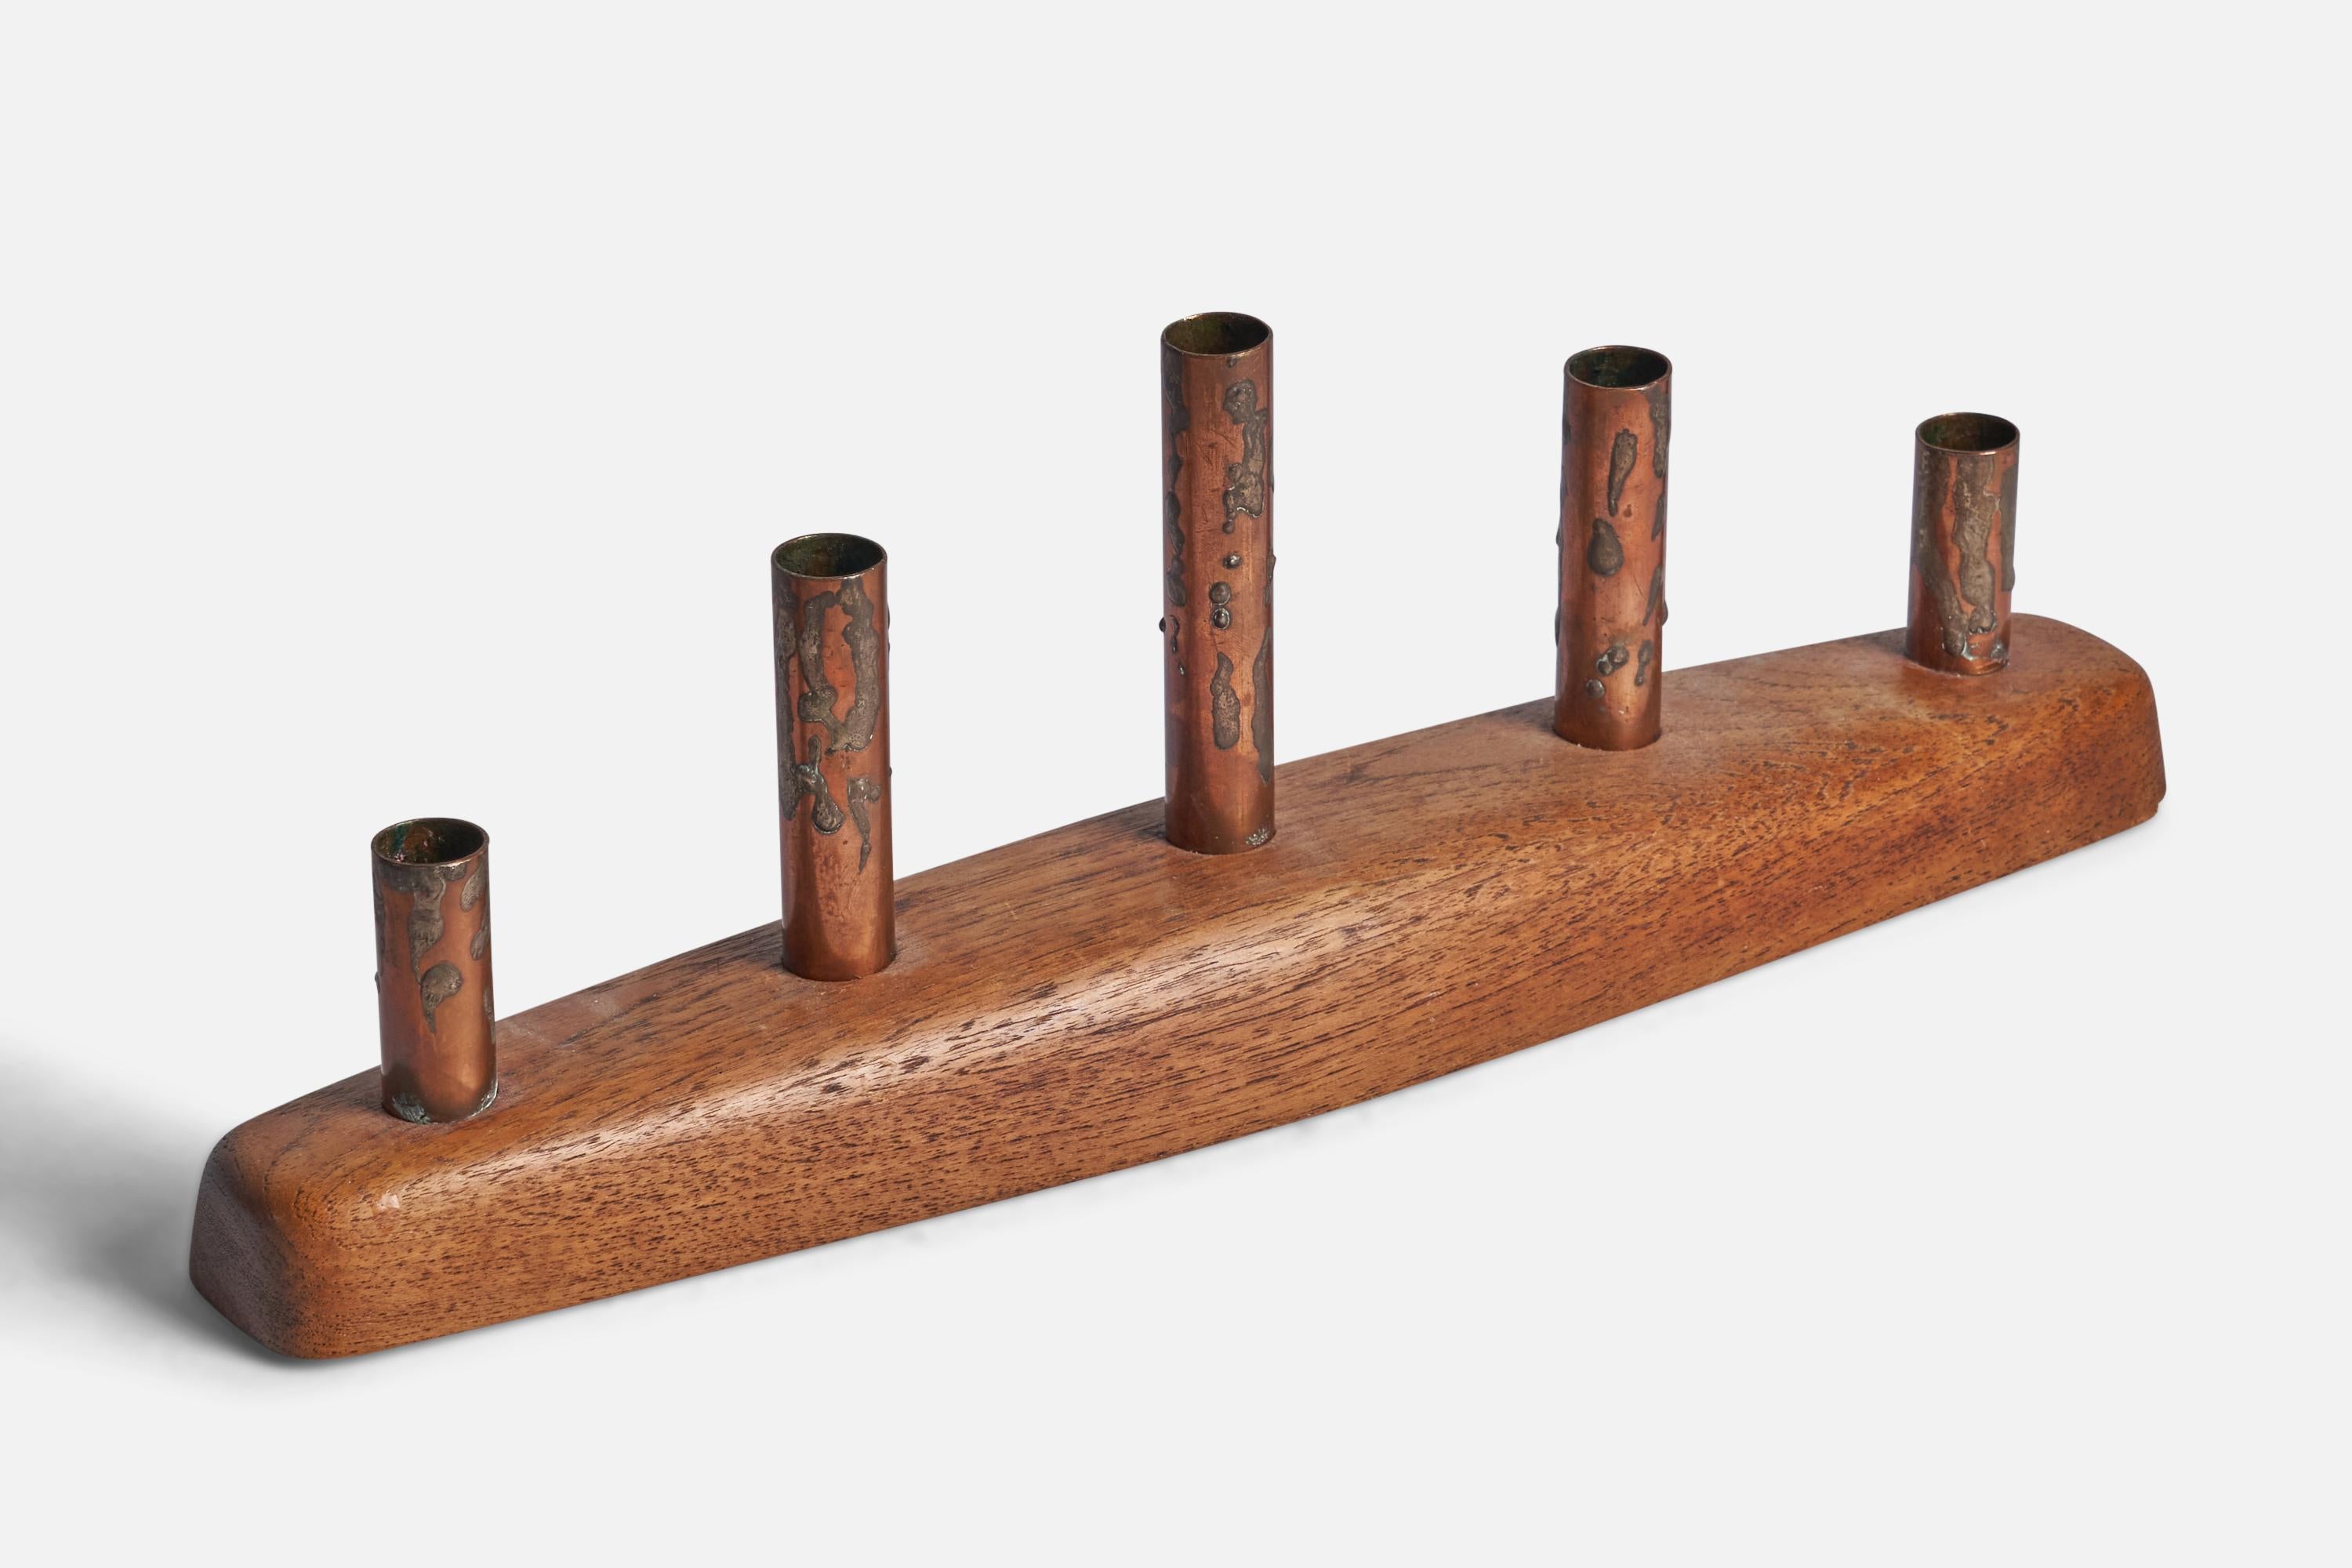 A teak, copper and tin candelabra designed and produced in Sweden, c. 1950s.

Fits 0.75” diameter candles